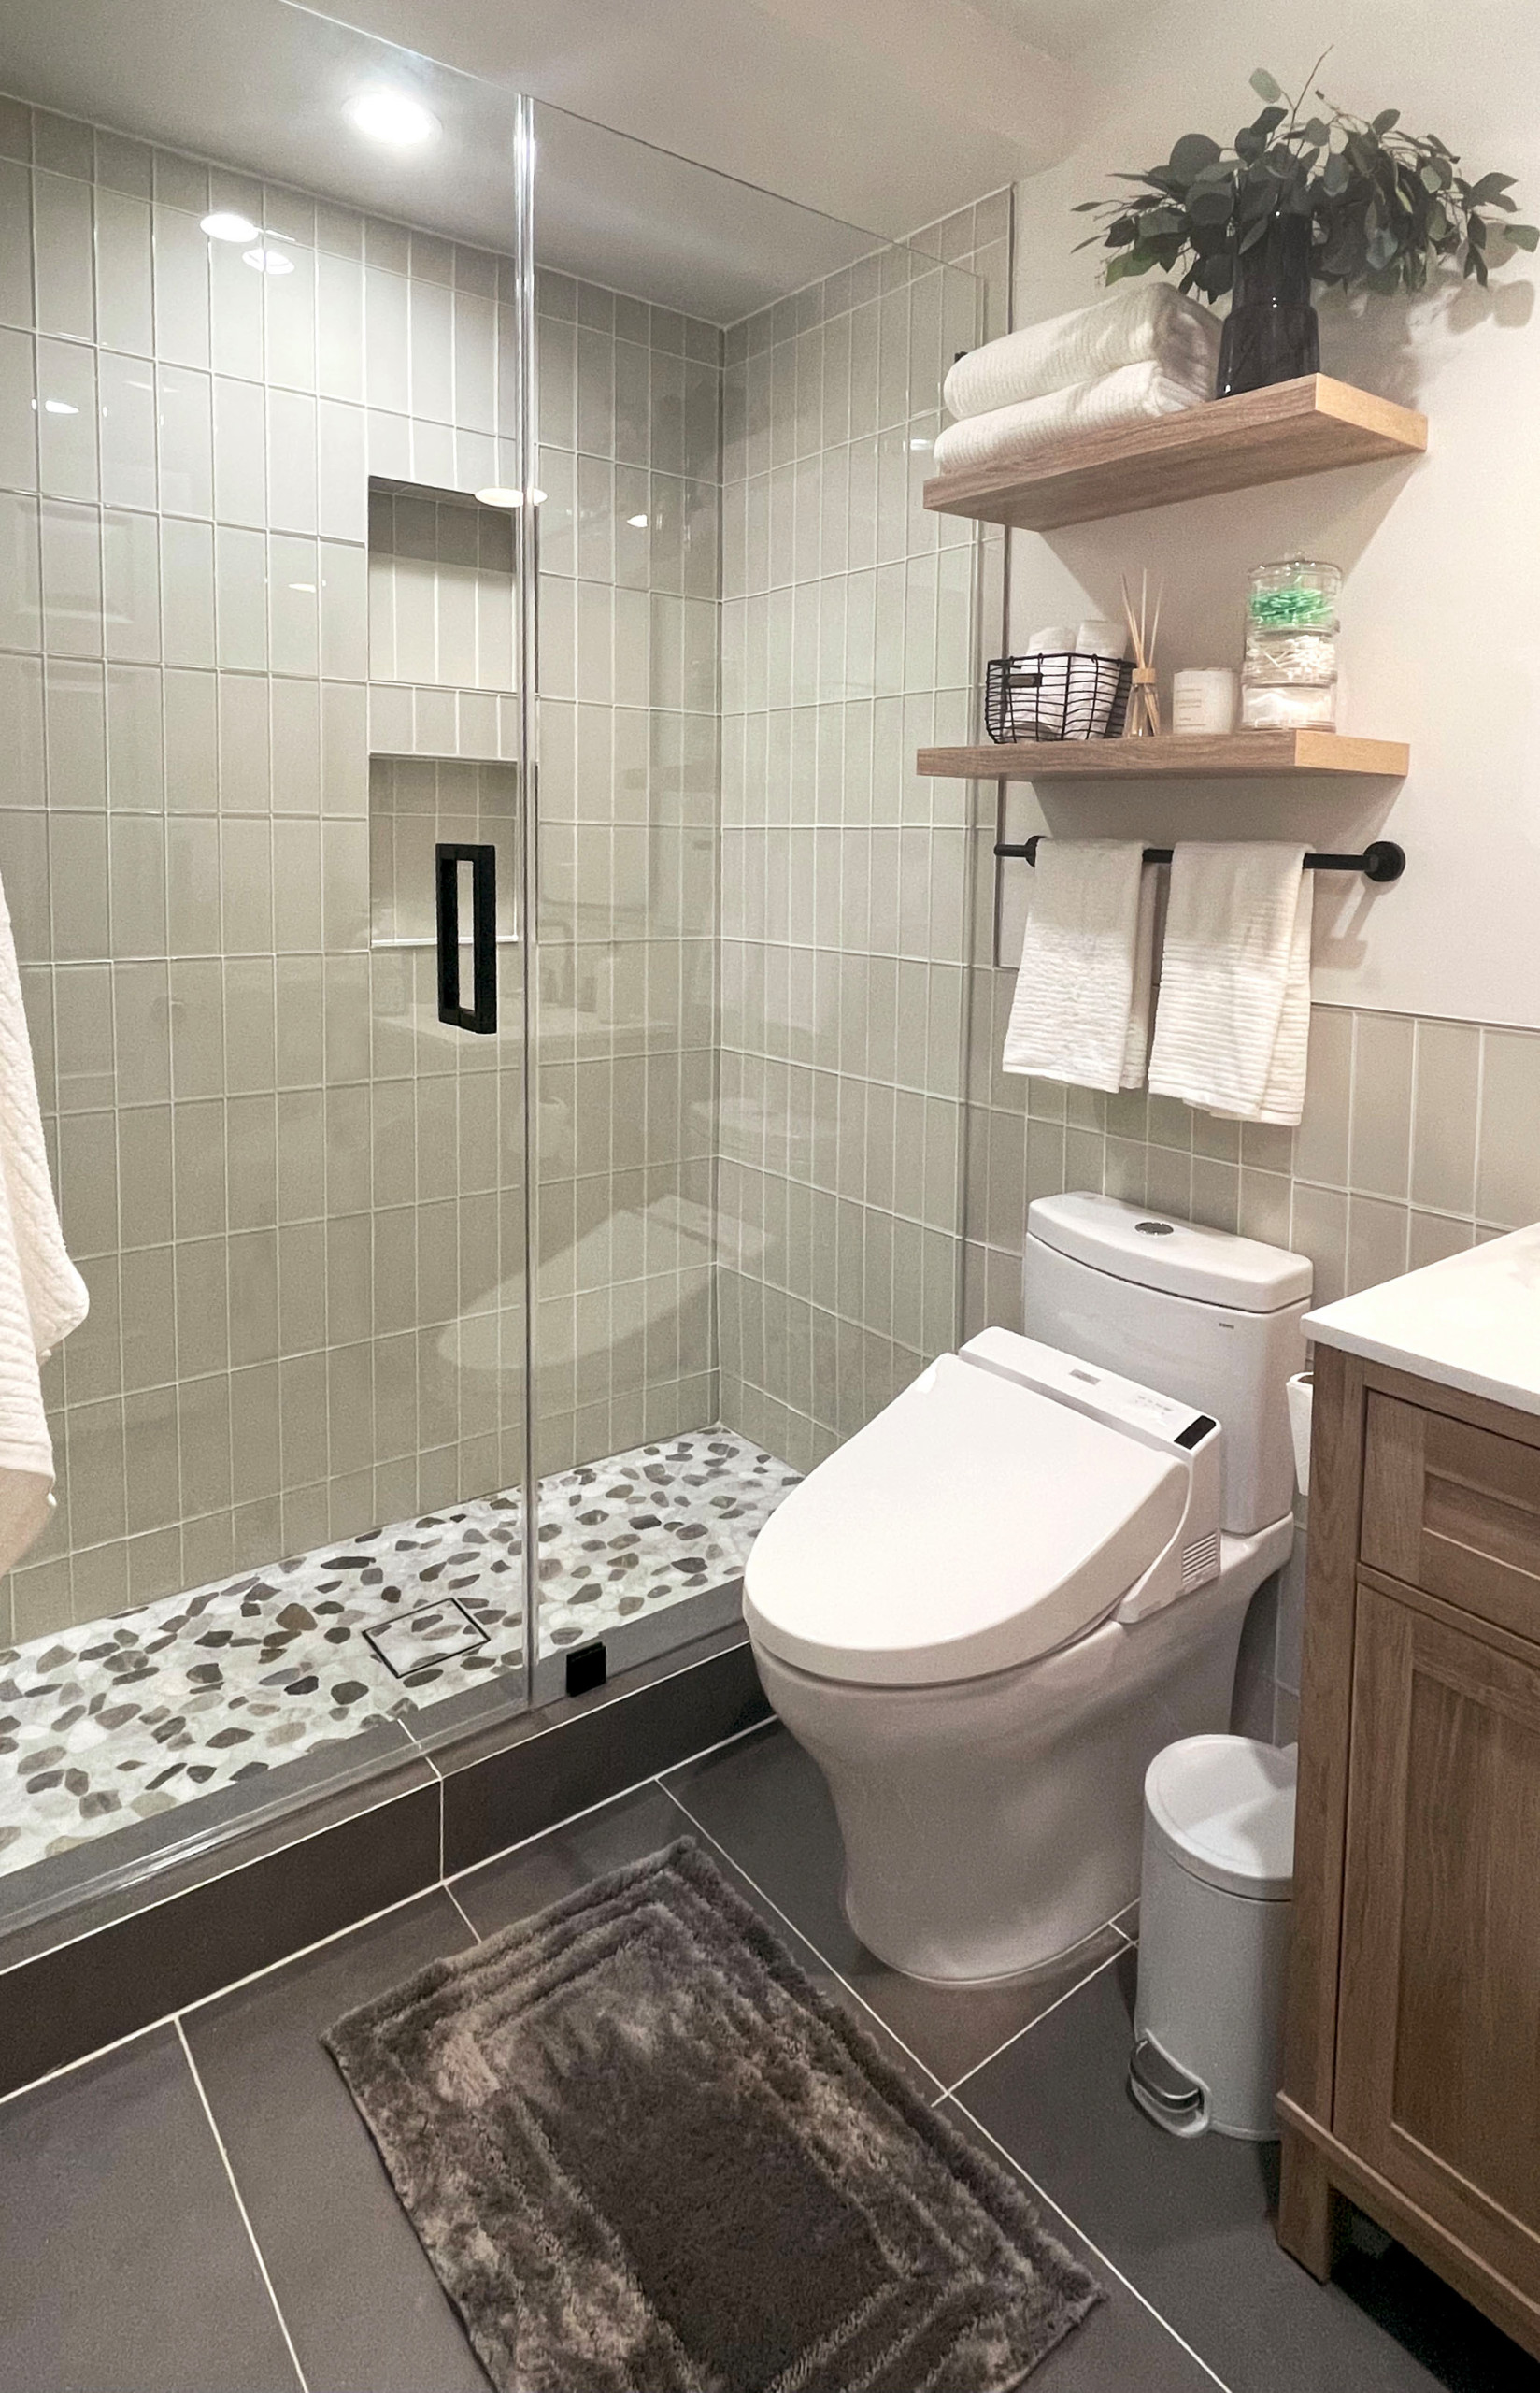 Light, glass tiles on the walls and a walk-in shower gives this small bathroom a